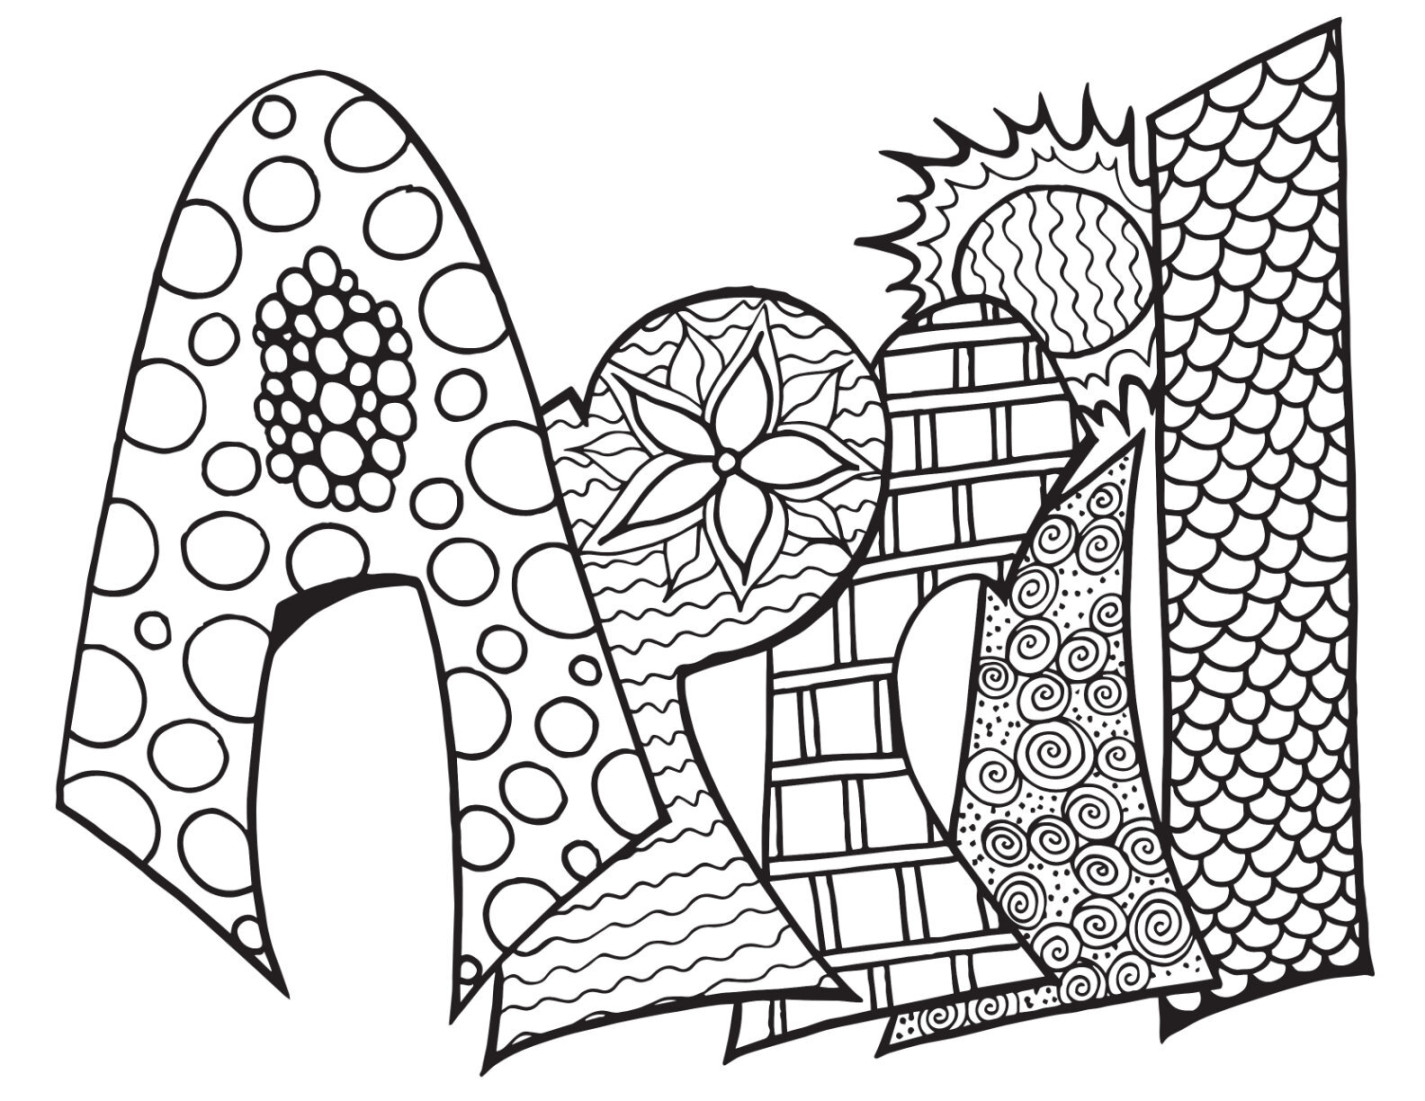 APRIL! Free Printable Coloring Page - Classic Stevie Doodle